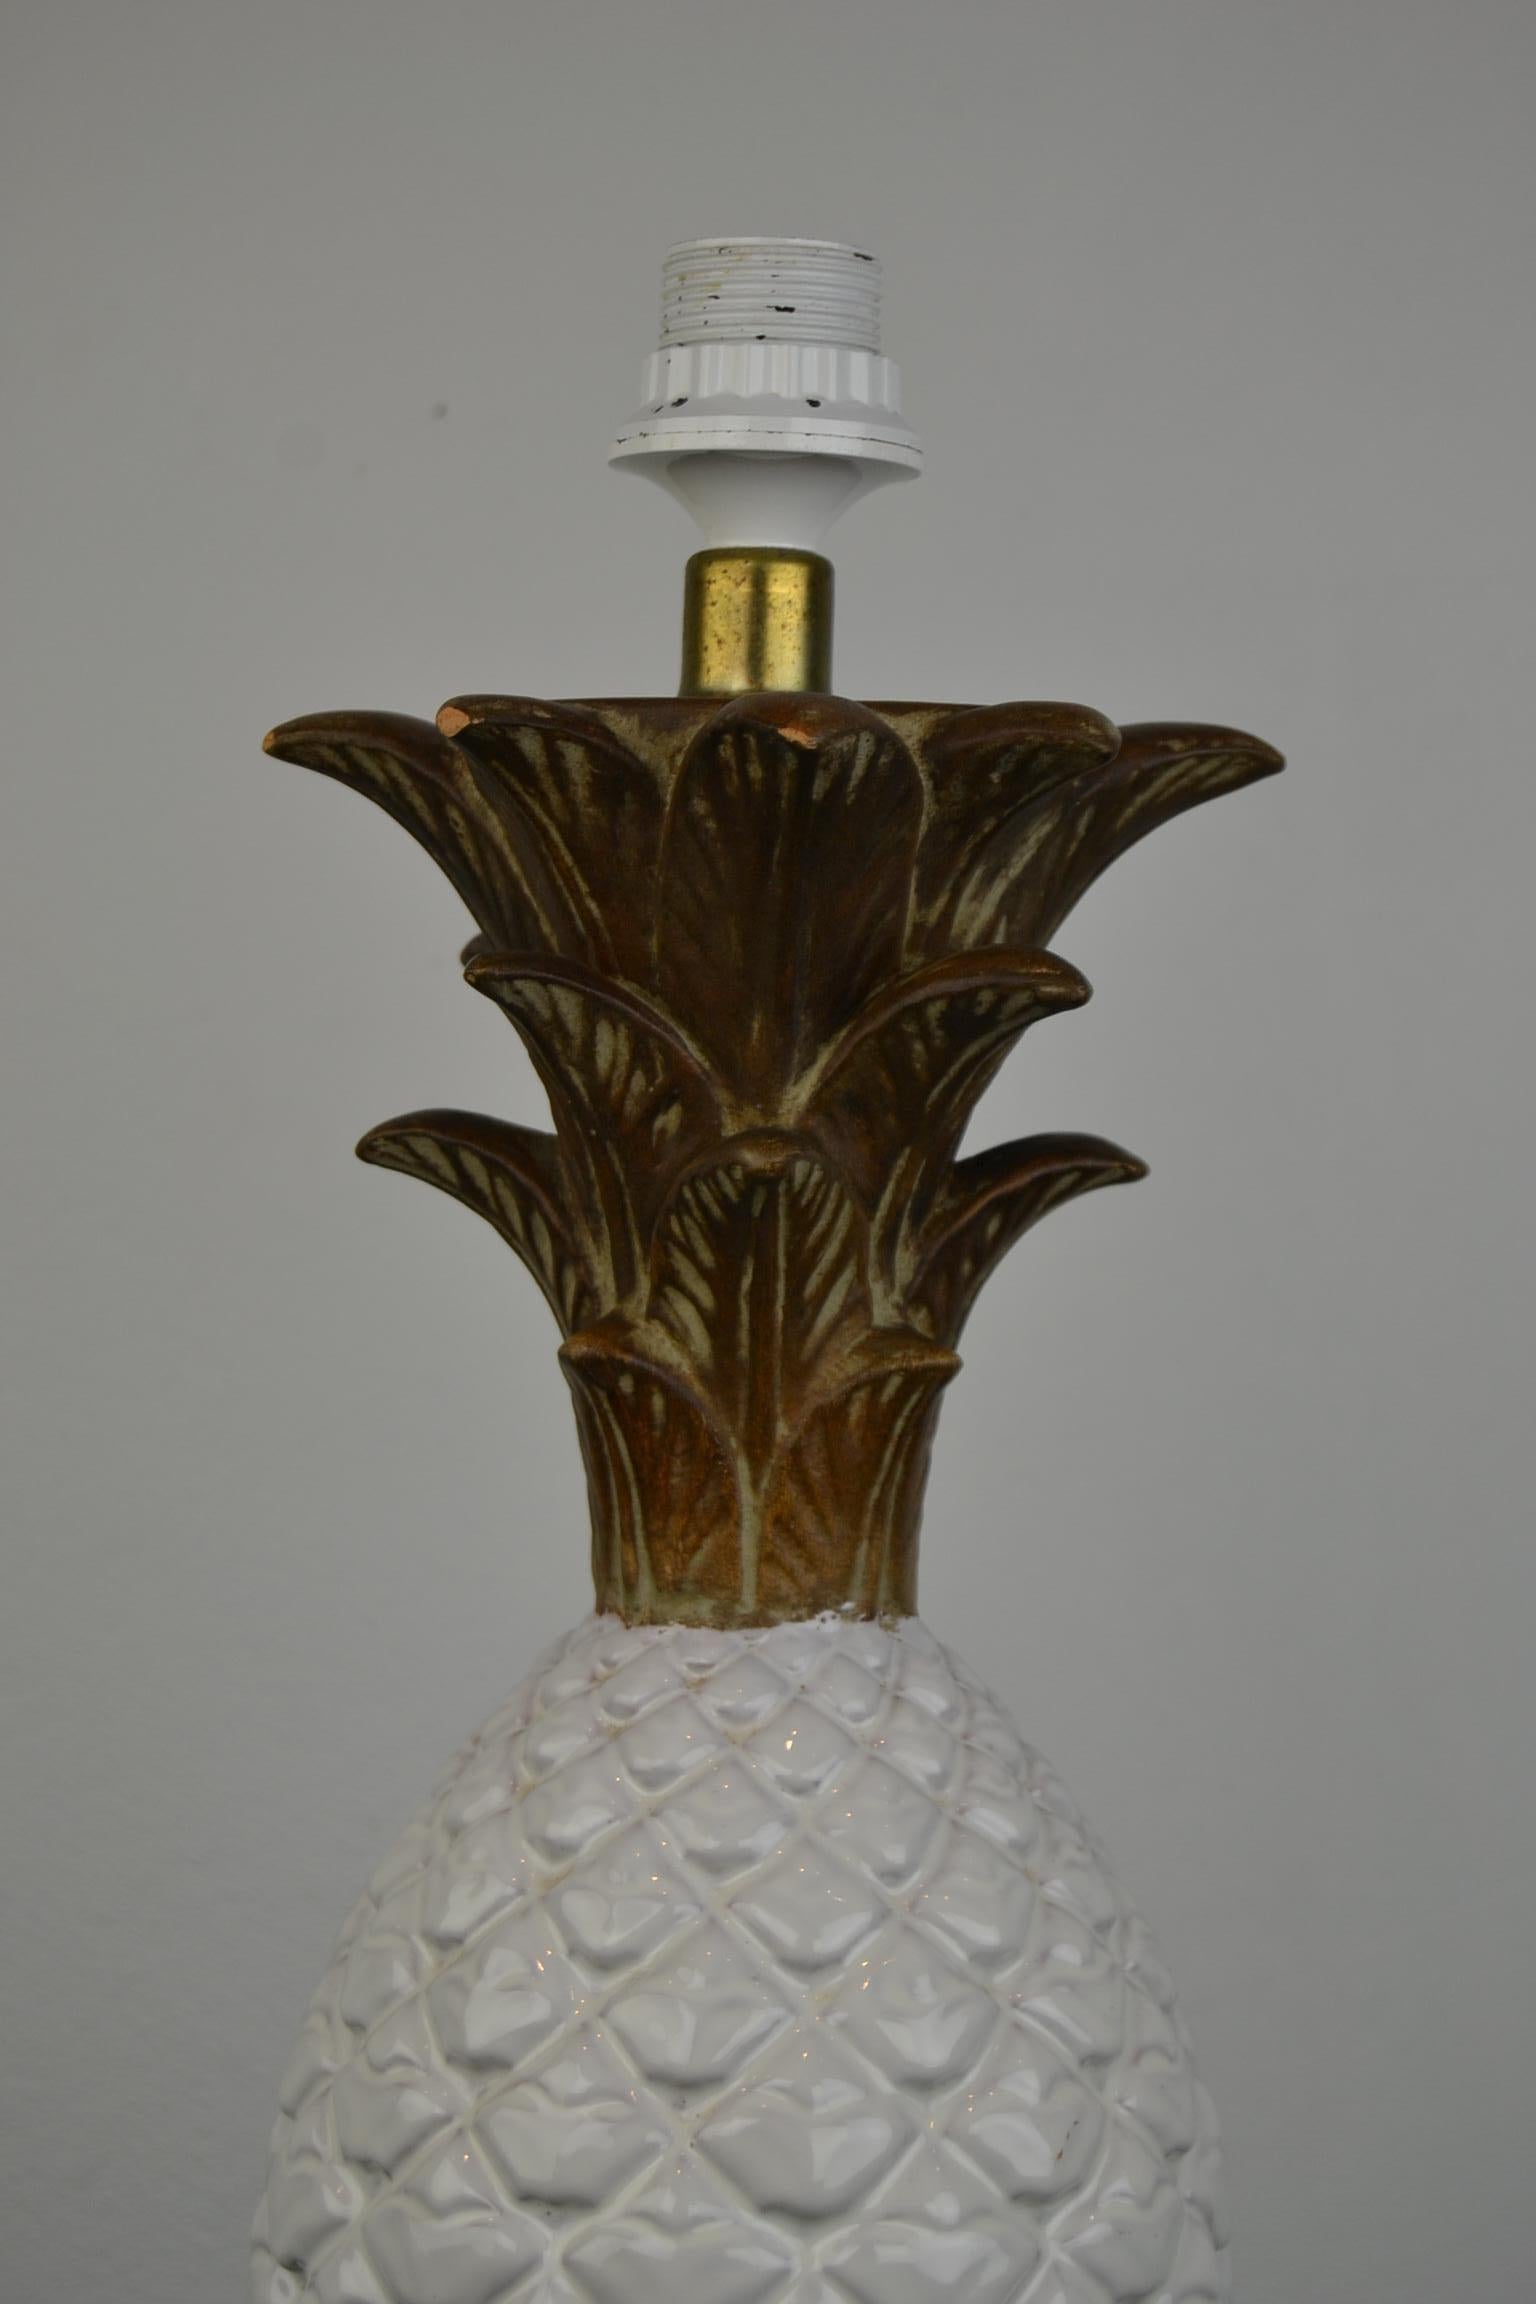 Zaccagnini Ceramic Pineapple Table Lamp, Italy, 1960s For Sale 8